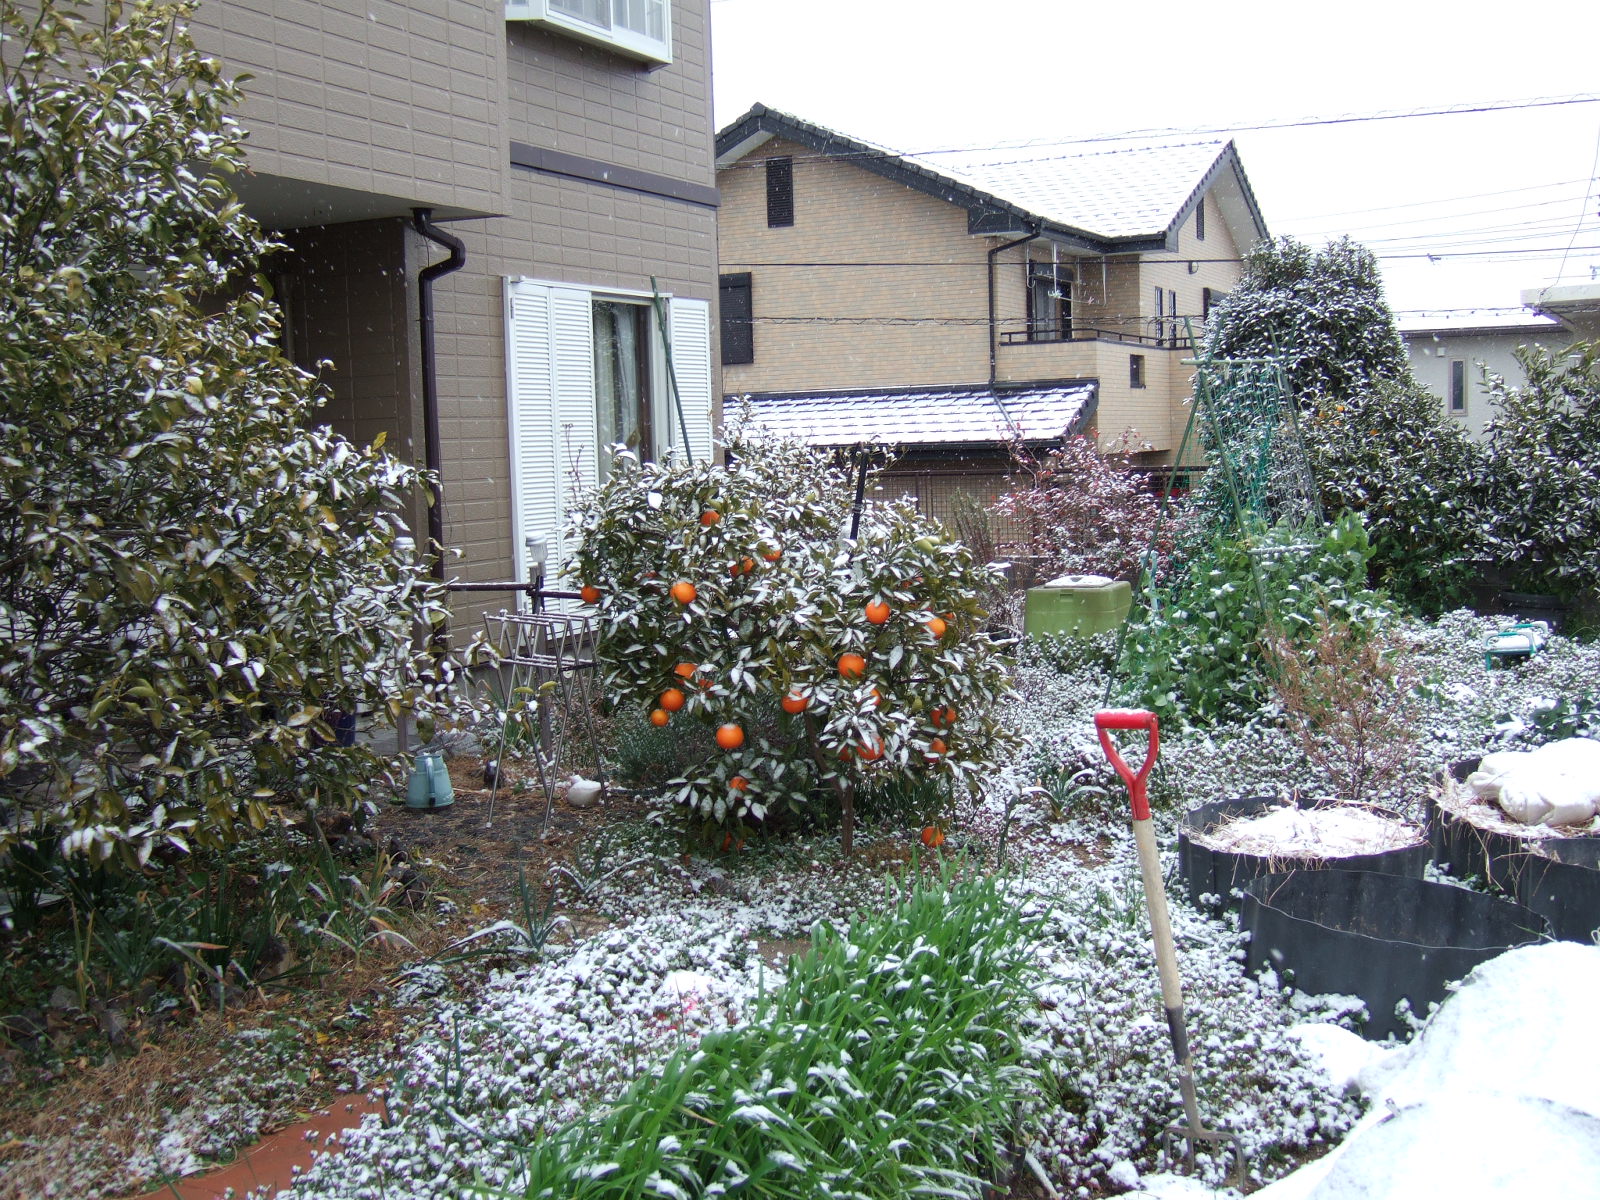 A bitter orange tree still bearing fruit stands in the middle of a garden, with the back entrance to the house behind. The tree and garden are covered in a light dusting of snow.